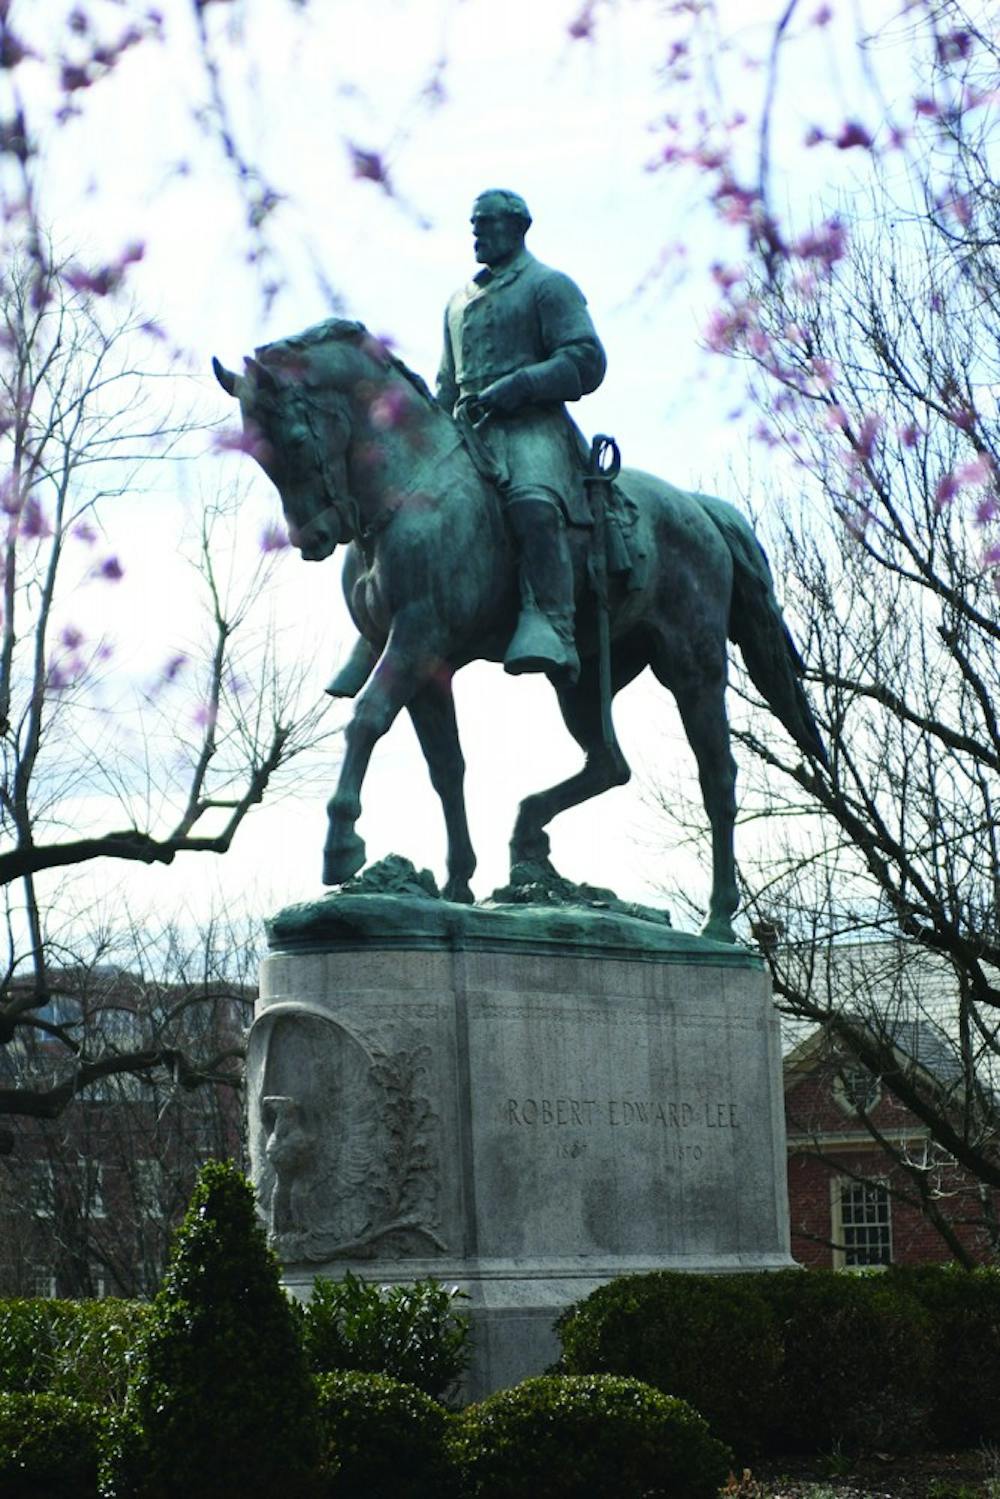 The statue of Robert E. Lee currently resides in Emancipation Park.